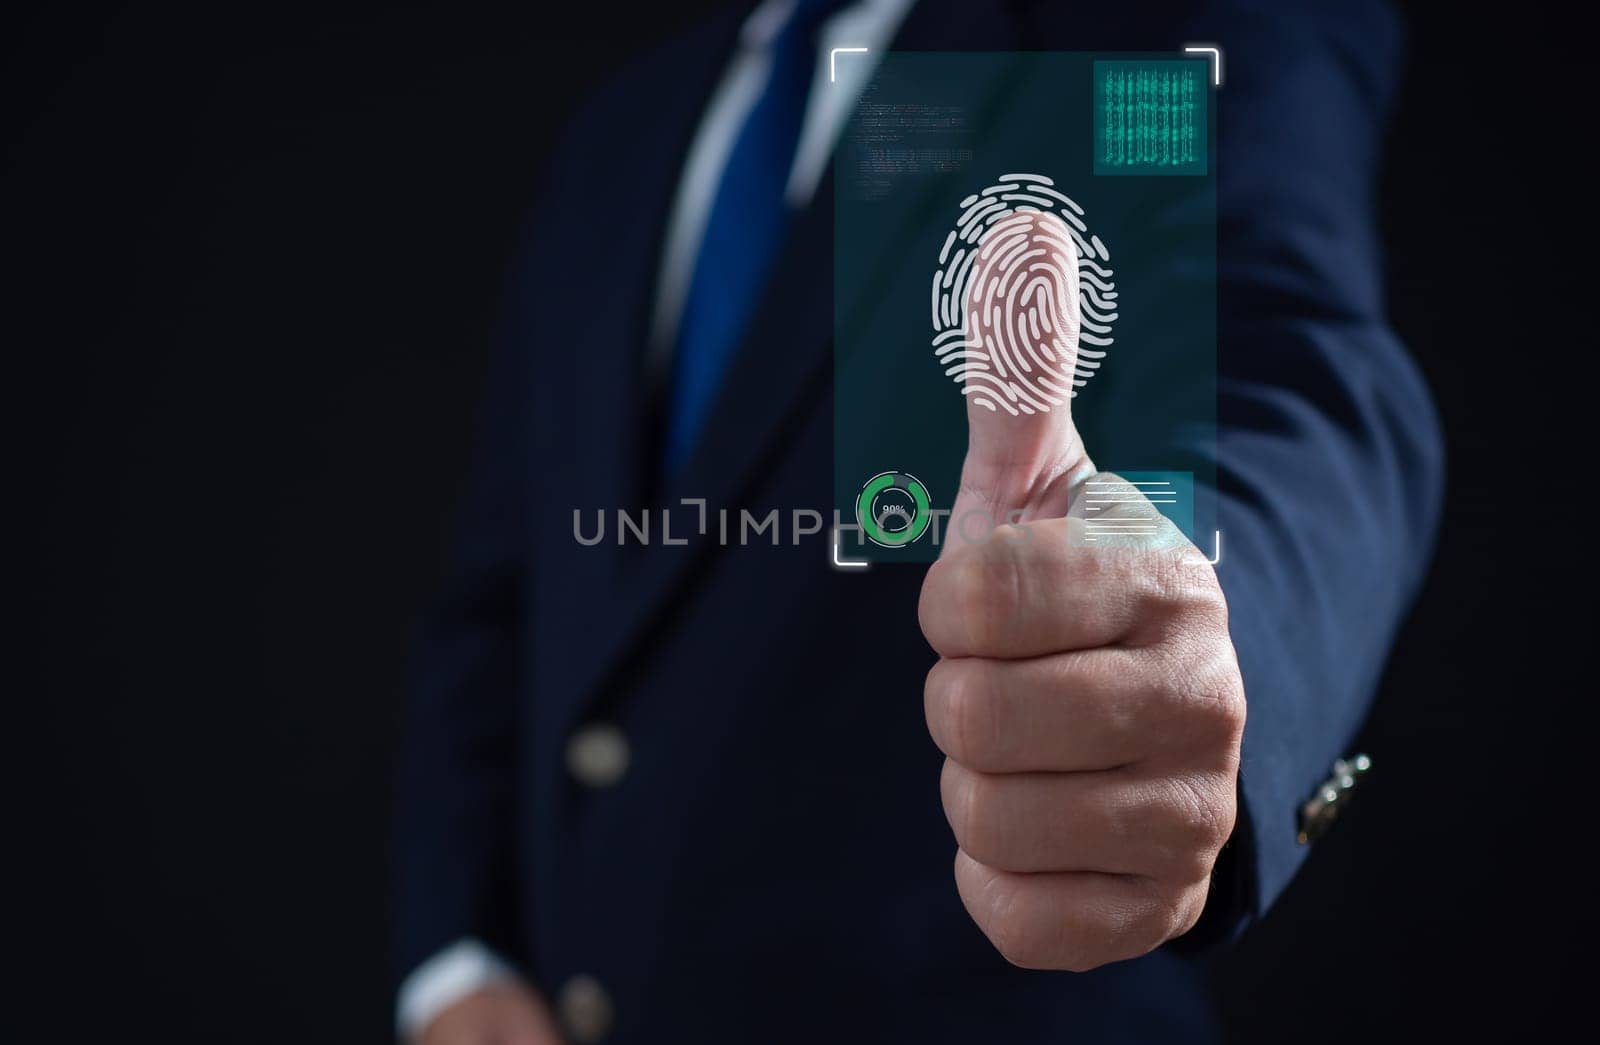 Businessman scan fingerprint biometric identity and approval. Secure access granted by valid fingerprint scan, Business Technology Safety Internet Network Concept, Business Technology Safety Internet Network Concept. by Unimages2527